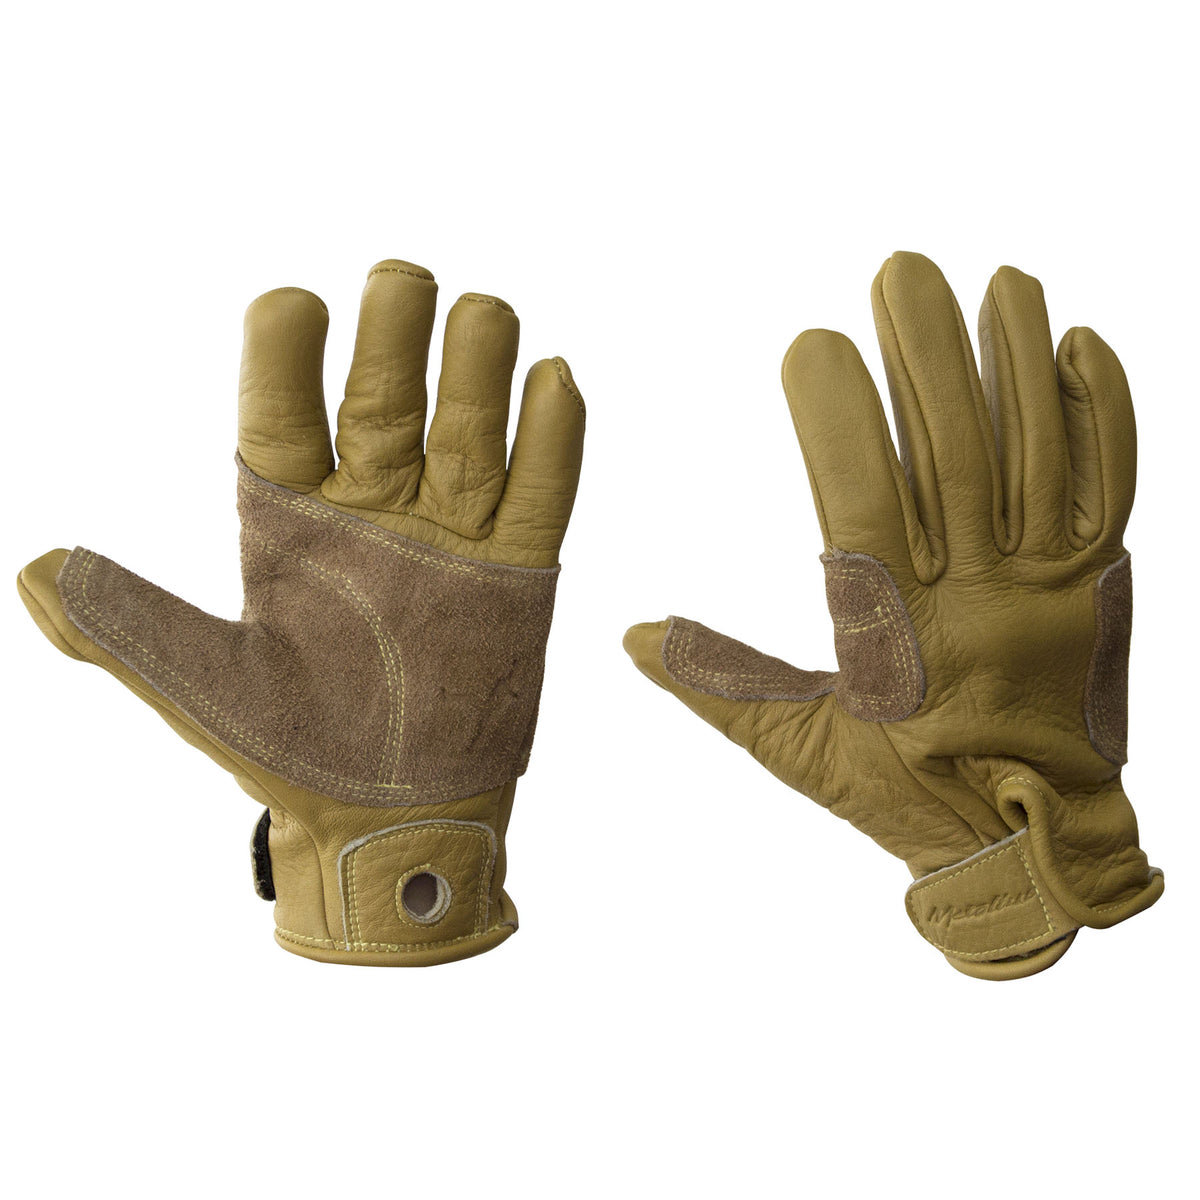 Photo of the Metolius Mountain Products full belay glove, both the palm and the back